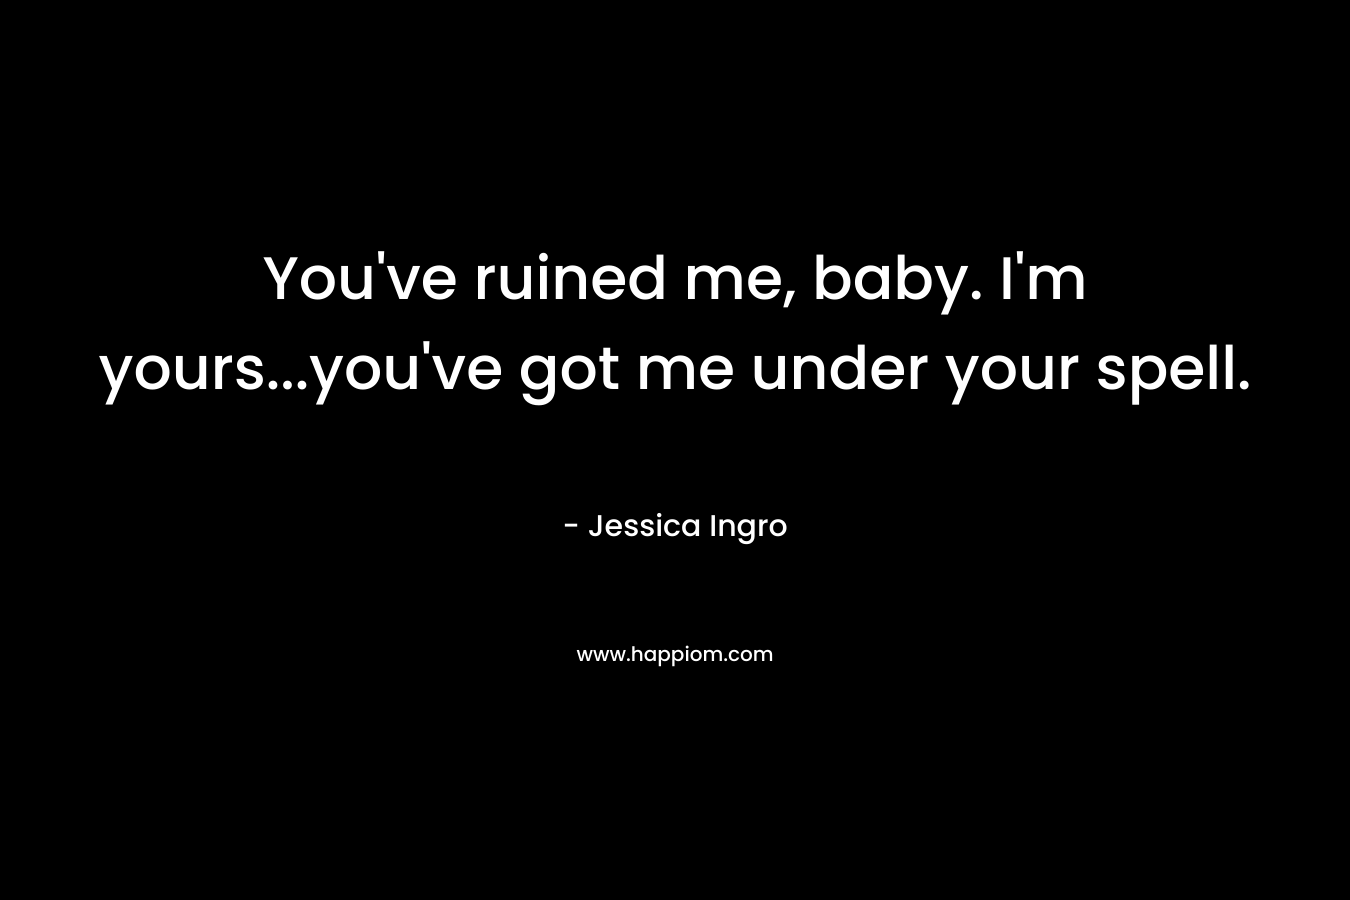 You’ve ruined me, baby. I’m yours…you’ve got me under your spell. – Jessica Ingro